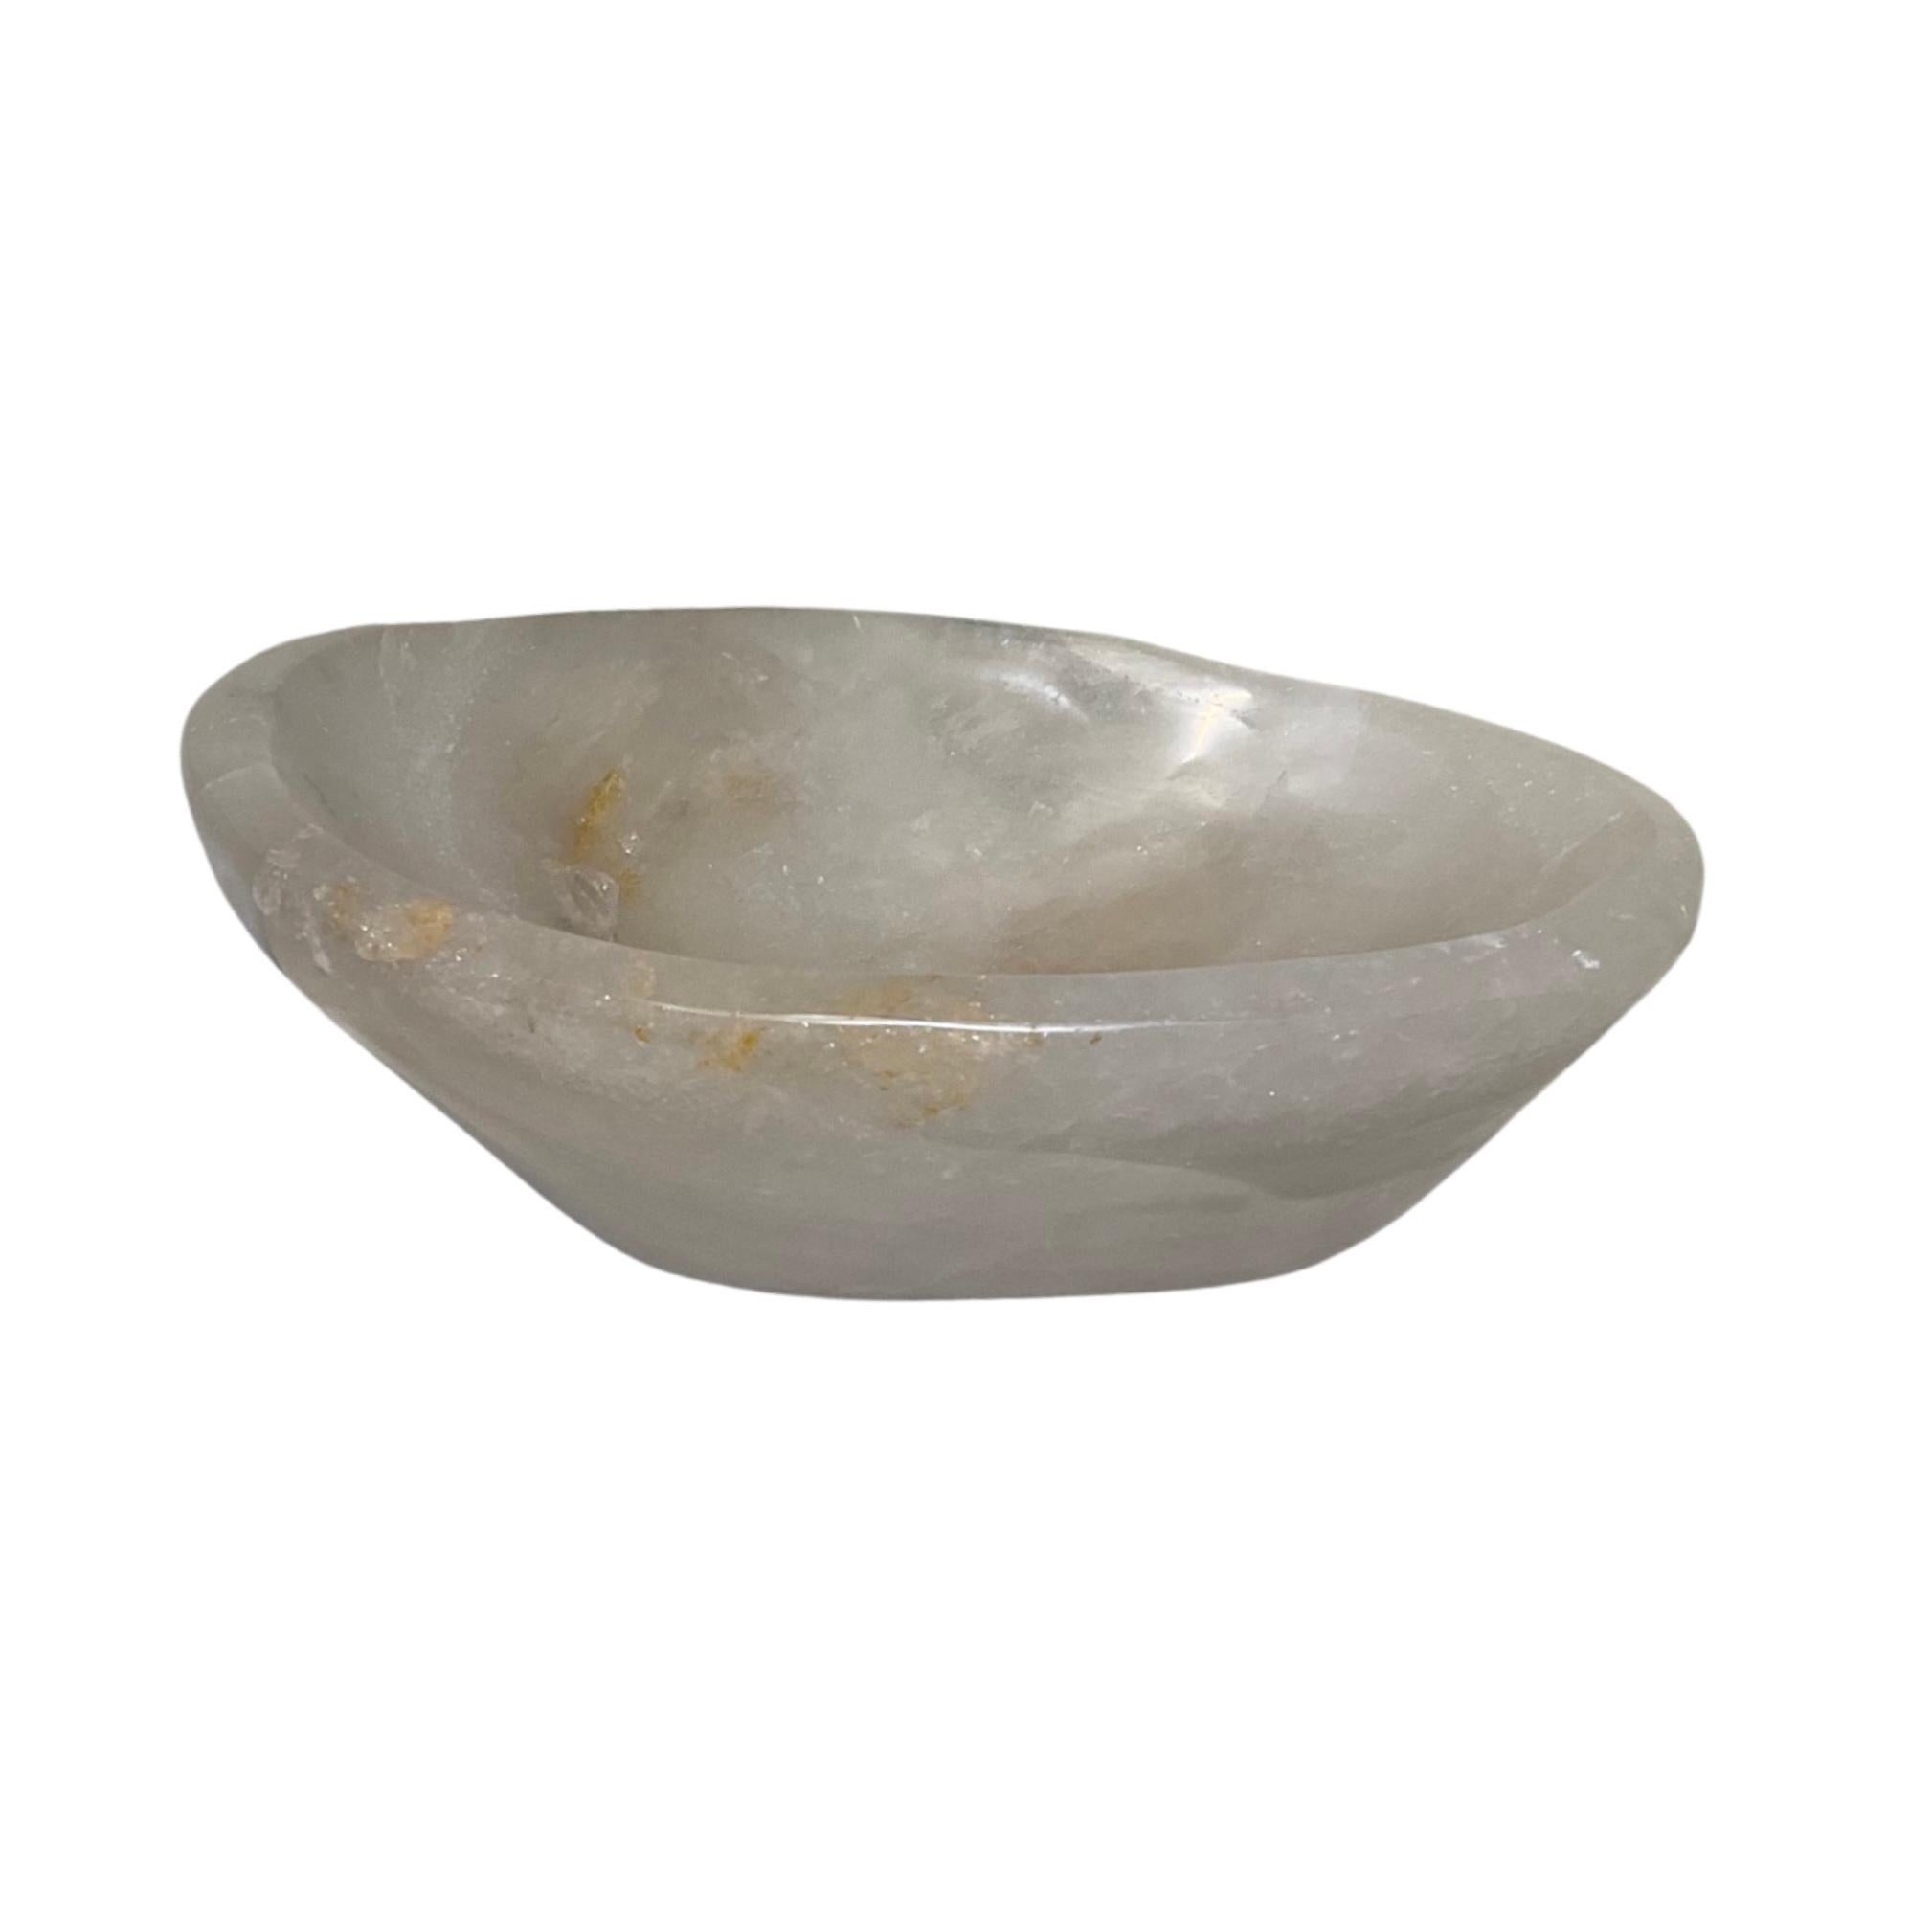 This Brazillian Rock Crystal Sink Bowl, crafted in 2010, adds a sleek and sophisticated note to any bathroom. Its polished surface provides an eye-catching focal point and its durability ensures it will remain beautiful for years to come. Enjoy the